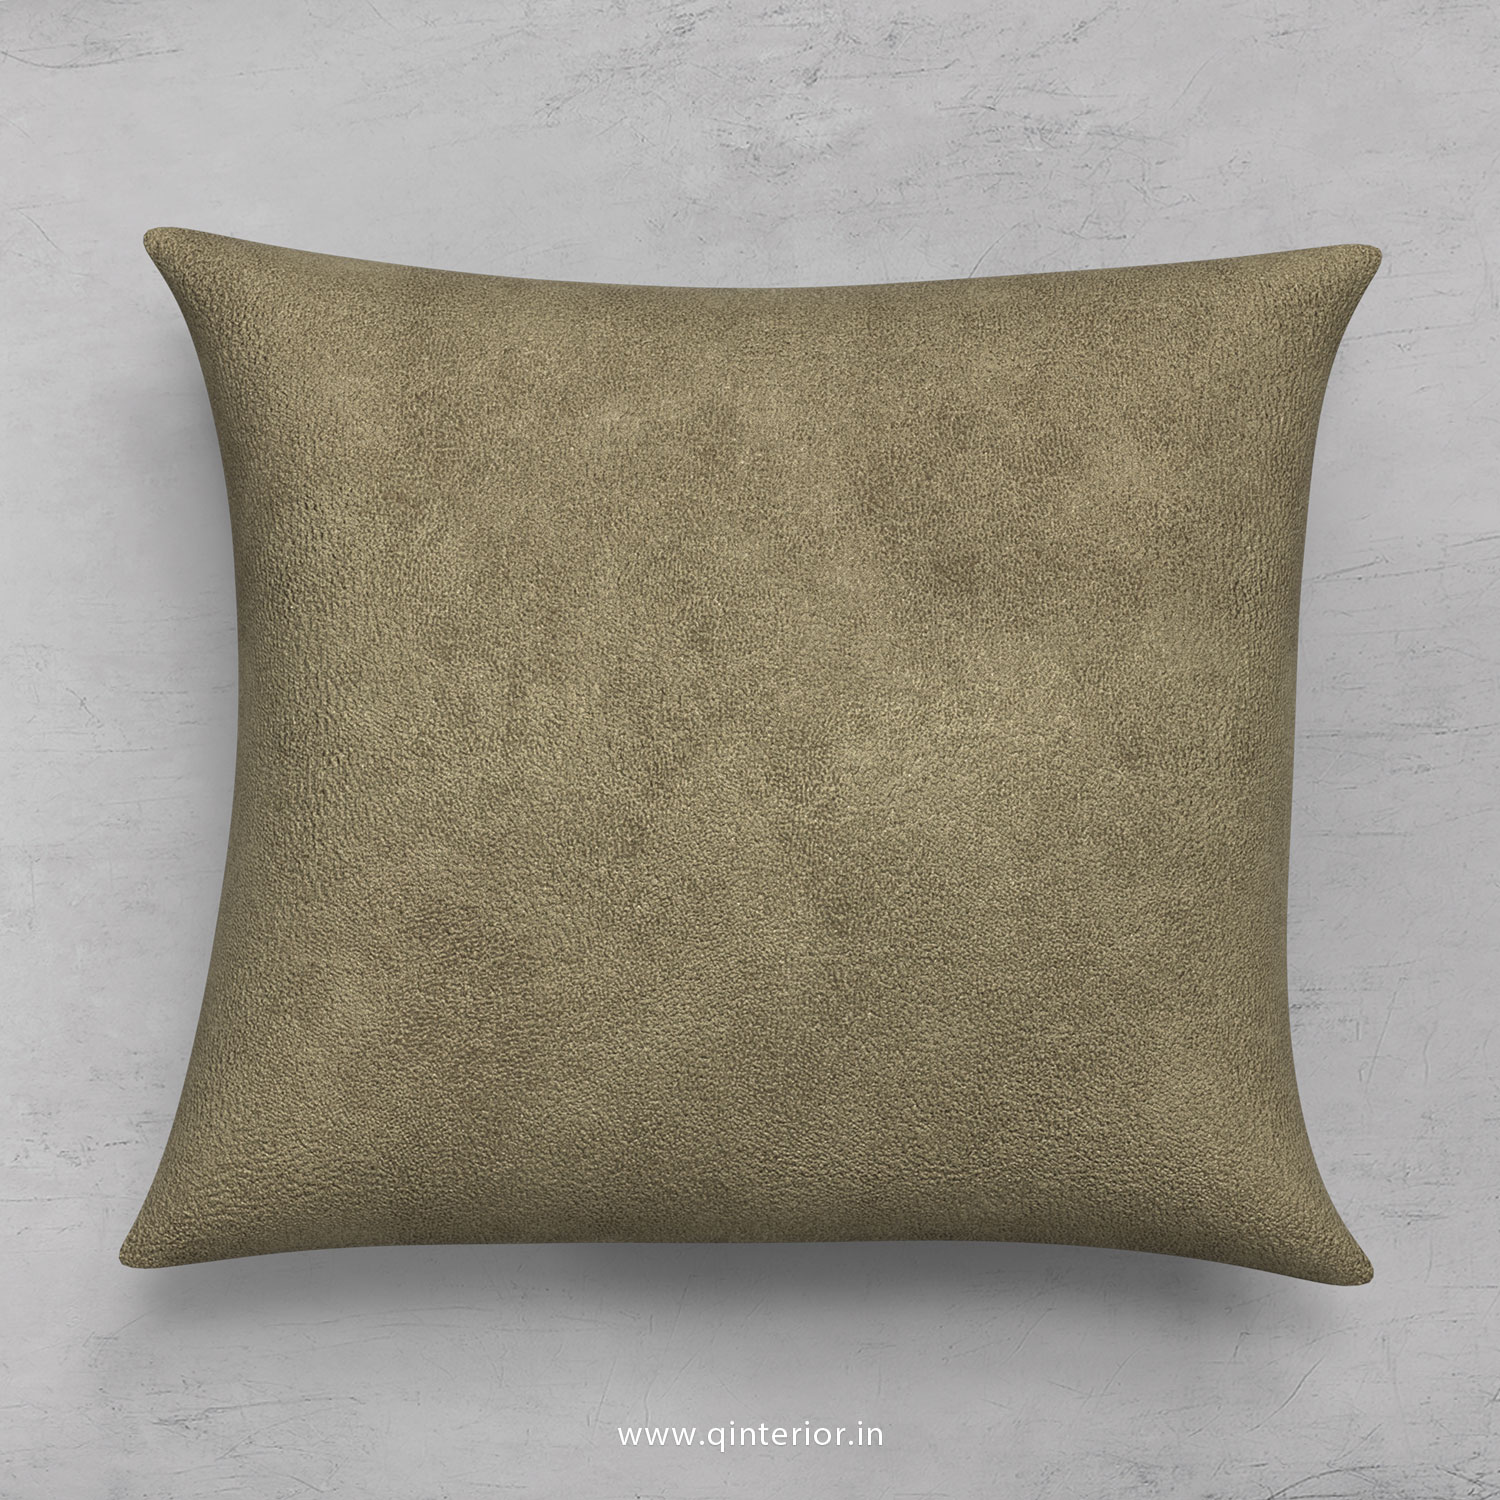 Cushion With Cushion Cover in Fab Leather- CUS001 FL03